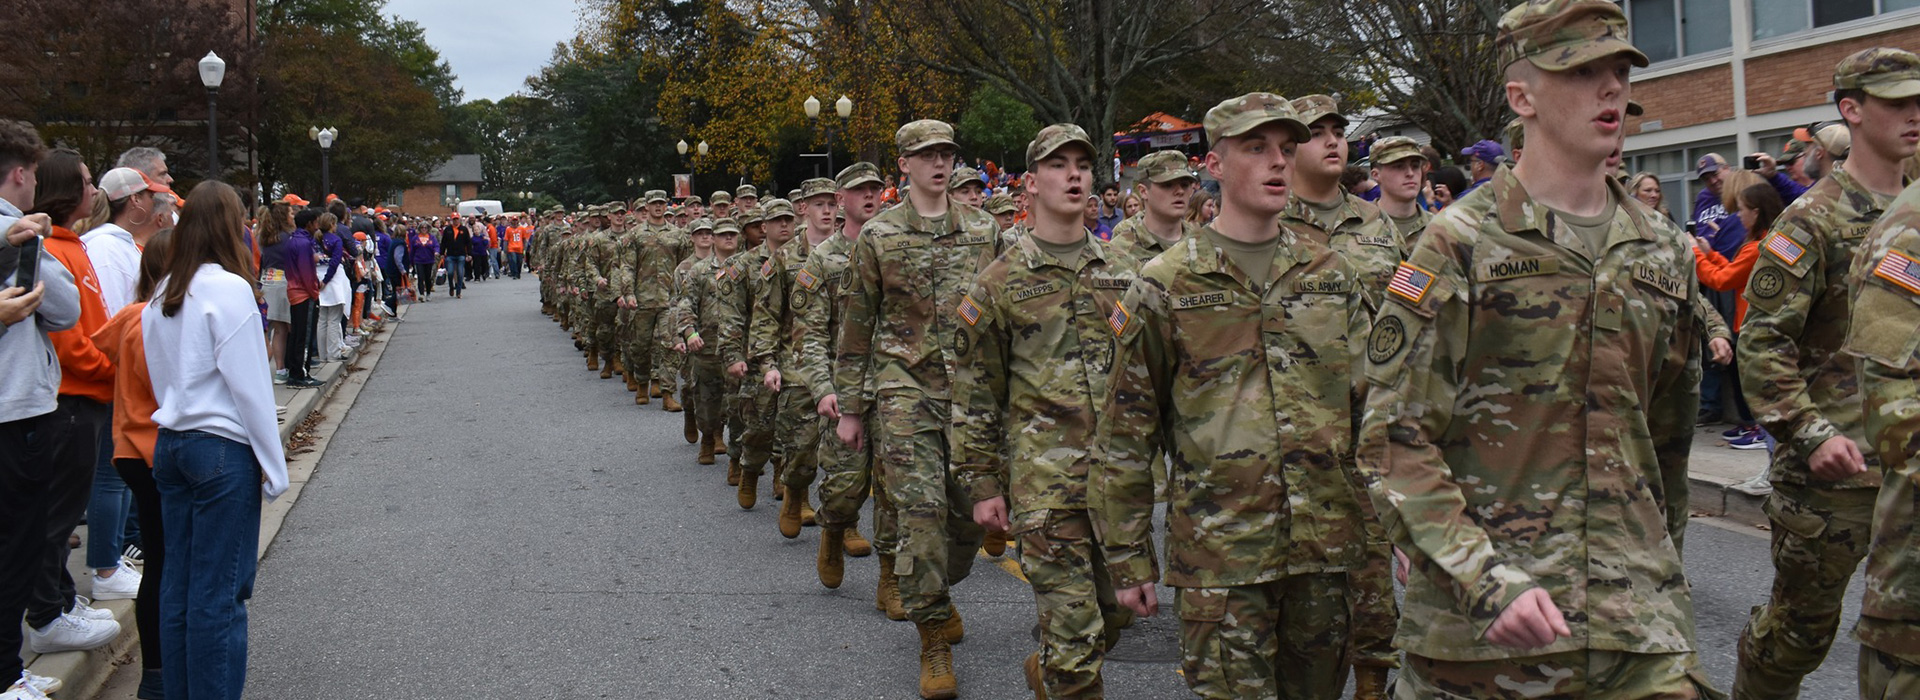 ARMY ROTC cadets lined up in camouflage on Bowman Field.